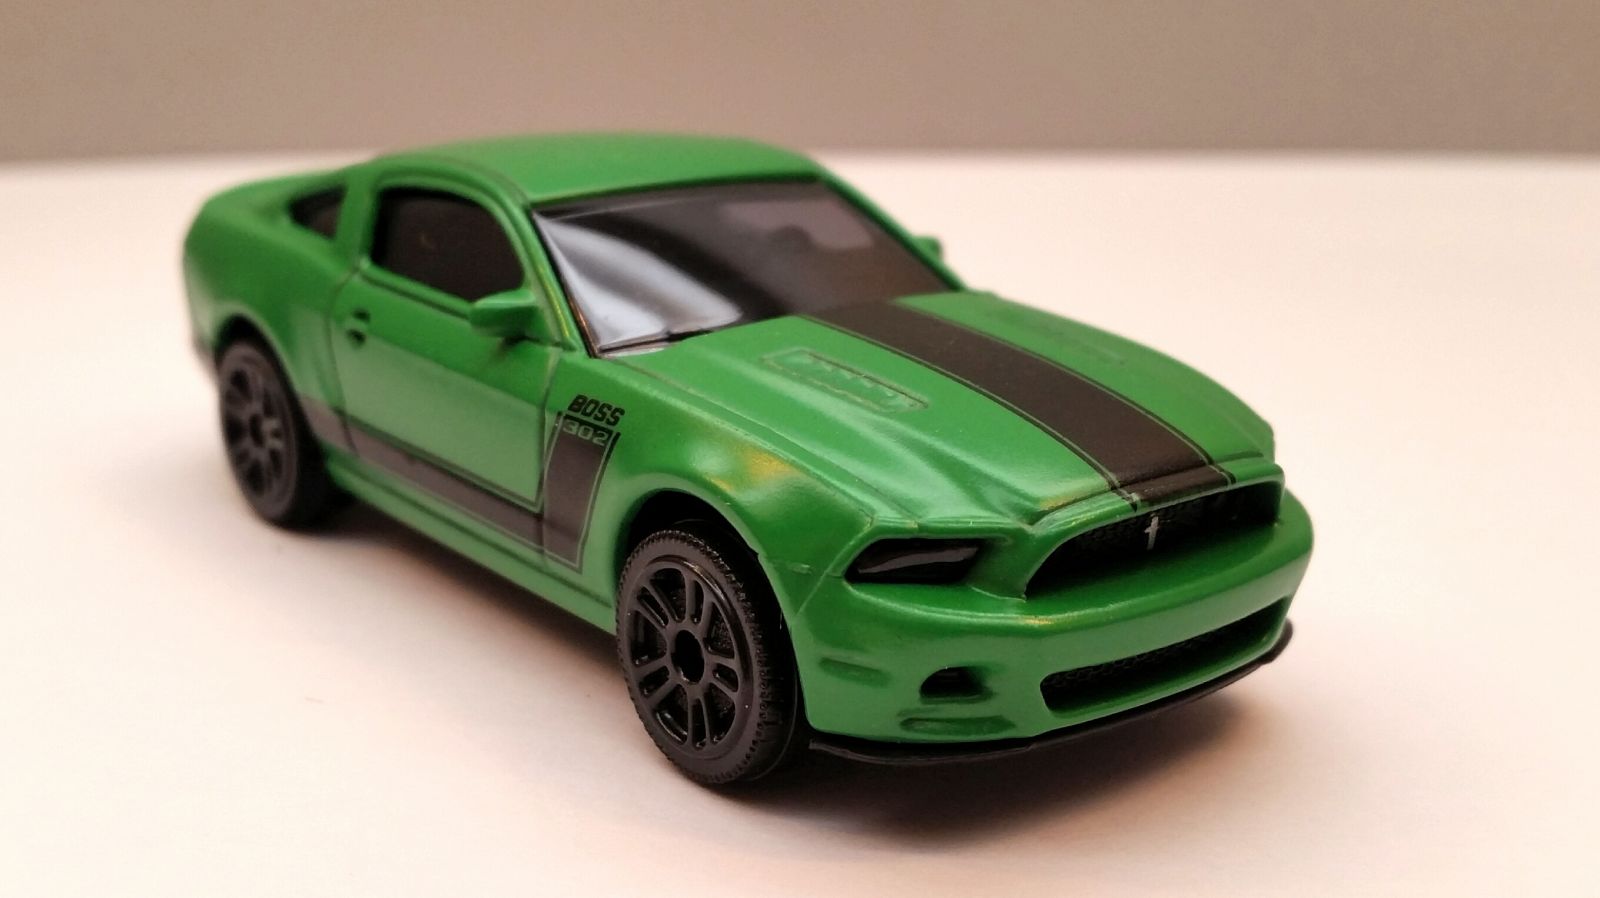 Majorette Boss 302 in it’s stock form with matte paint.